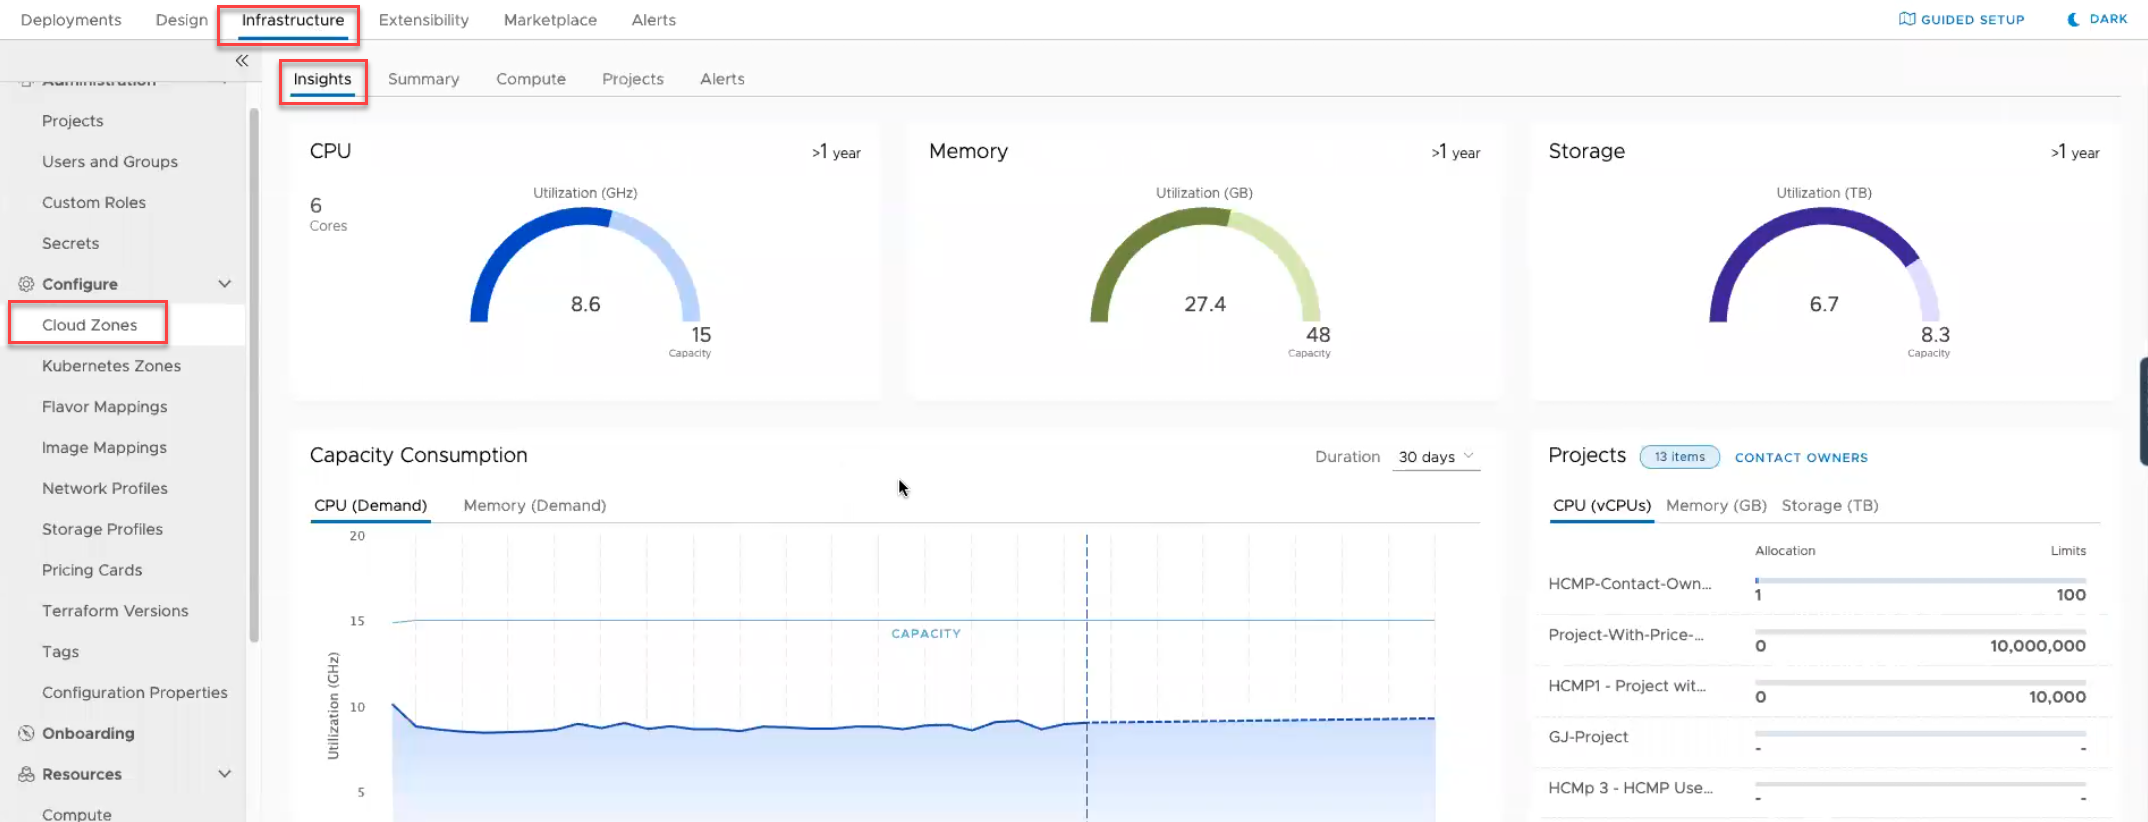 Sample Insights dashboard showing CPU, memory, and storage capacity